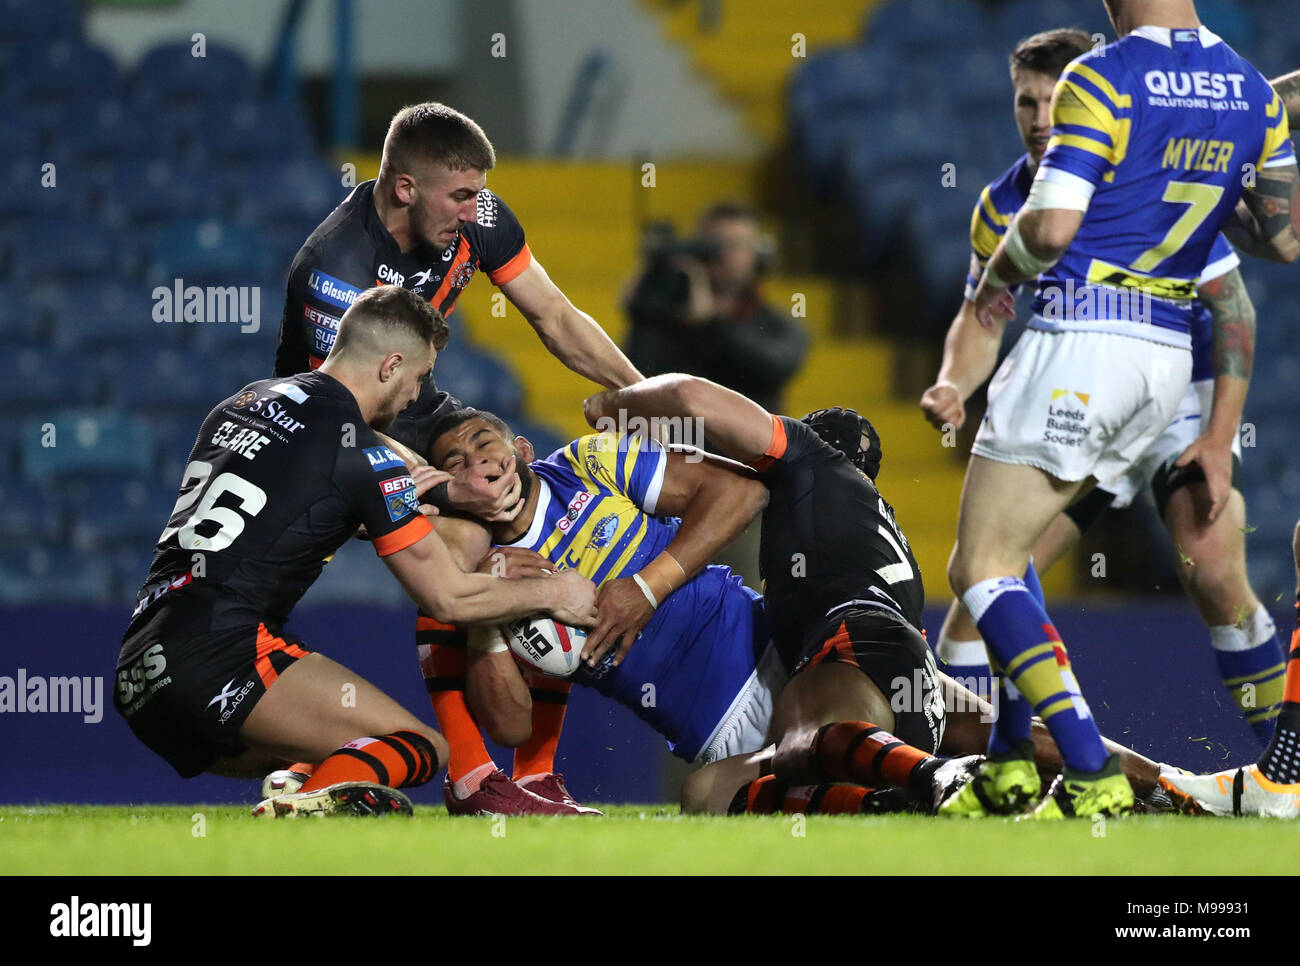 Leeds Rhinos' Kallum Watkins dives in to score his sides first try during the Betfred Super League match at Elland Road, Leeds. Stock Photo